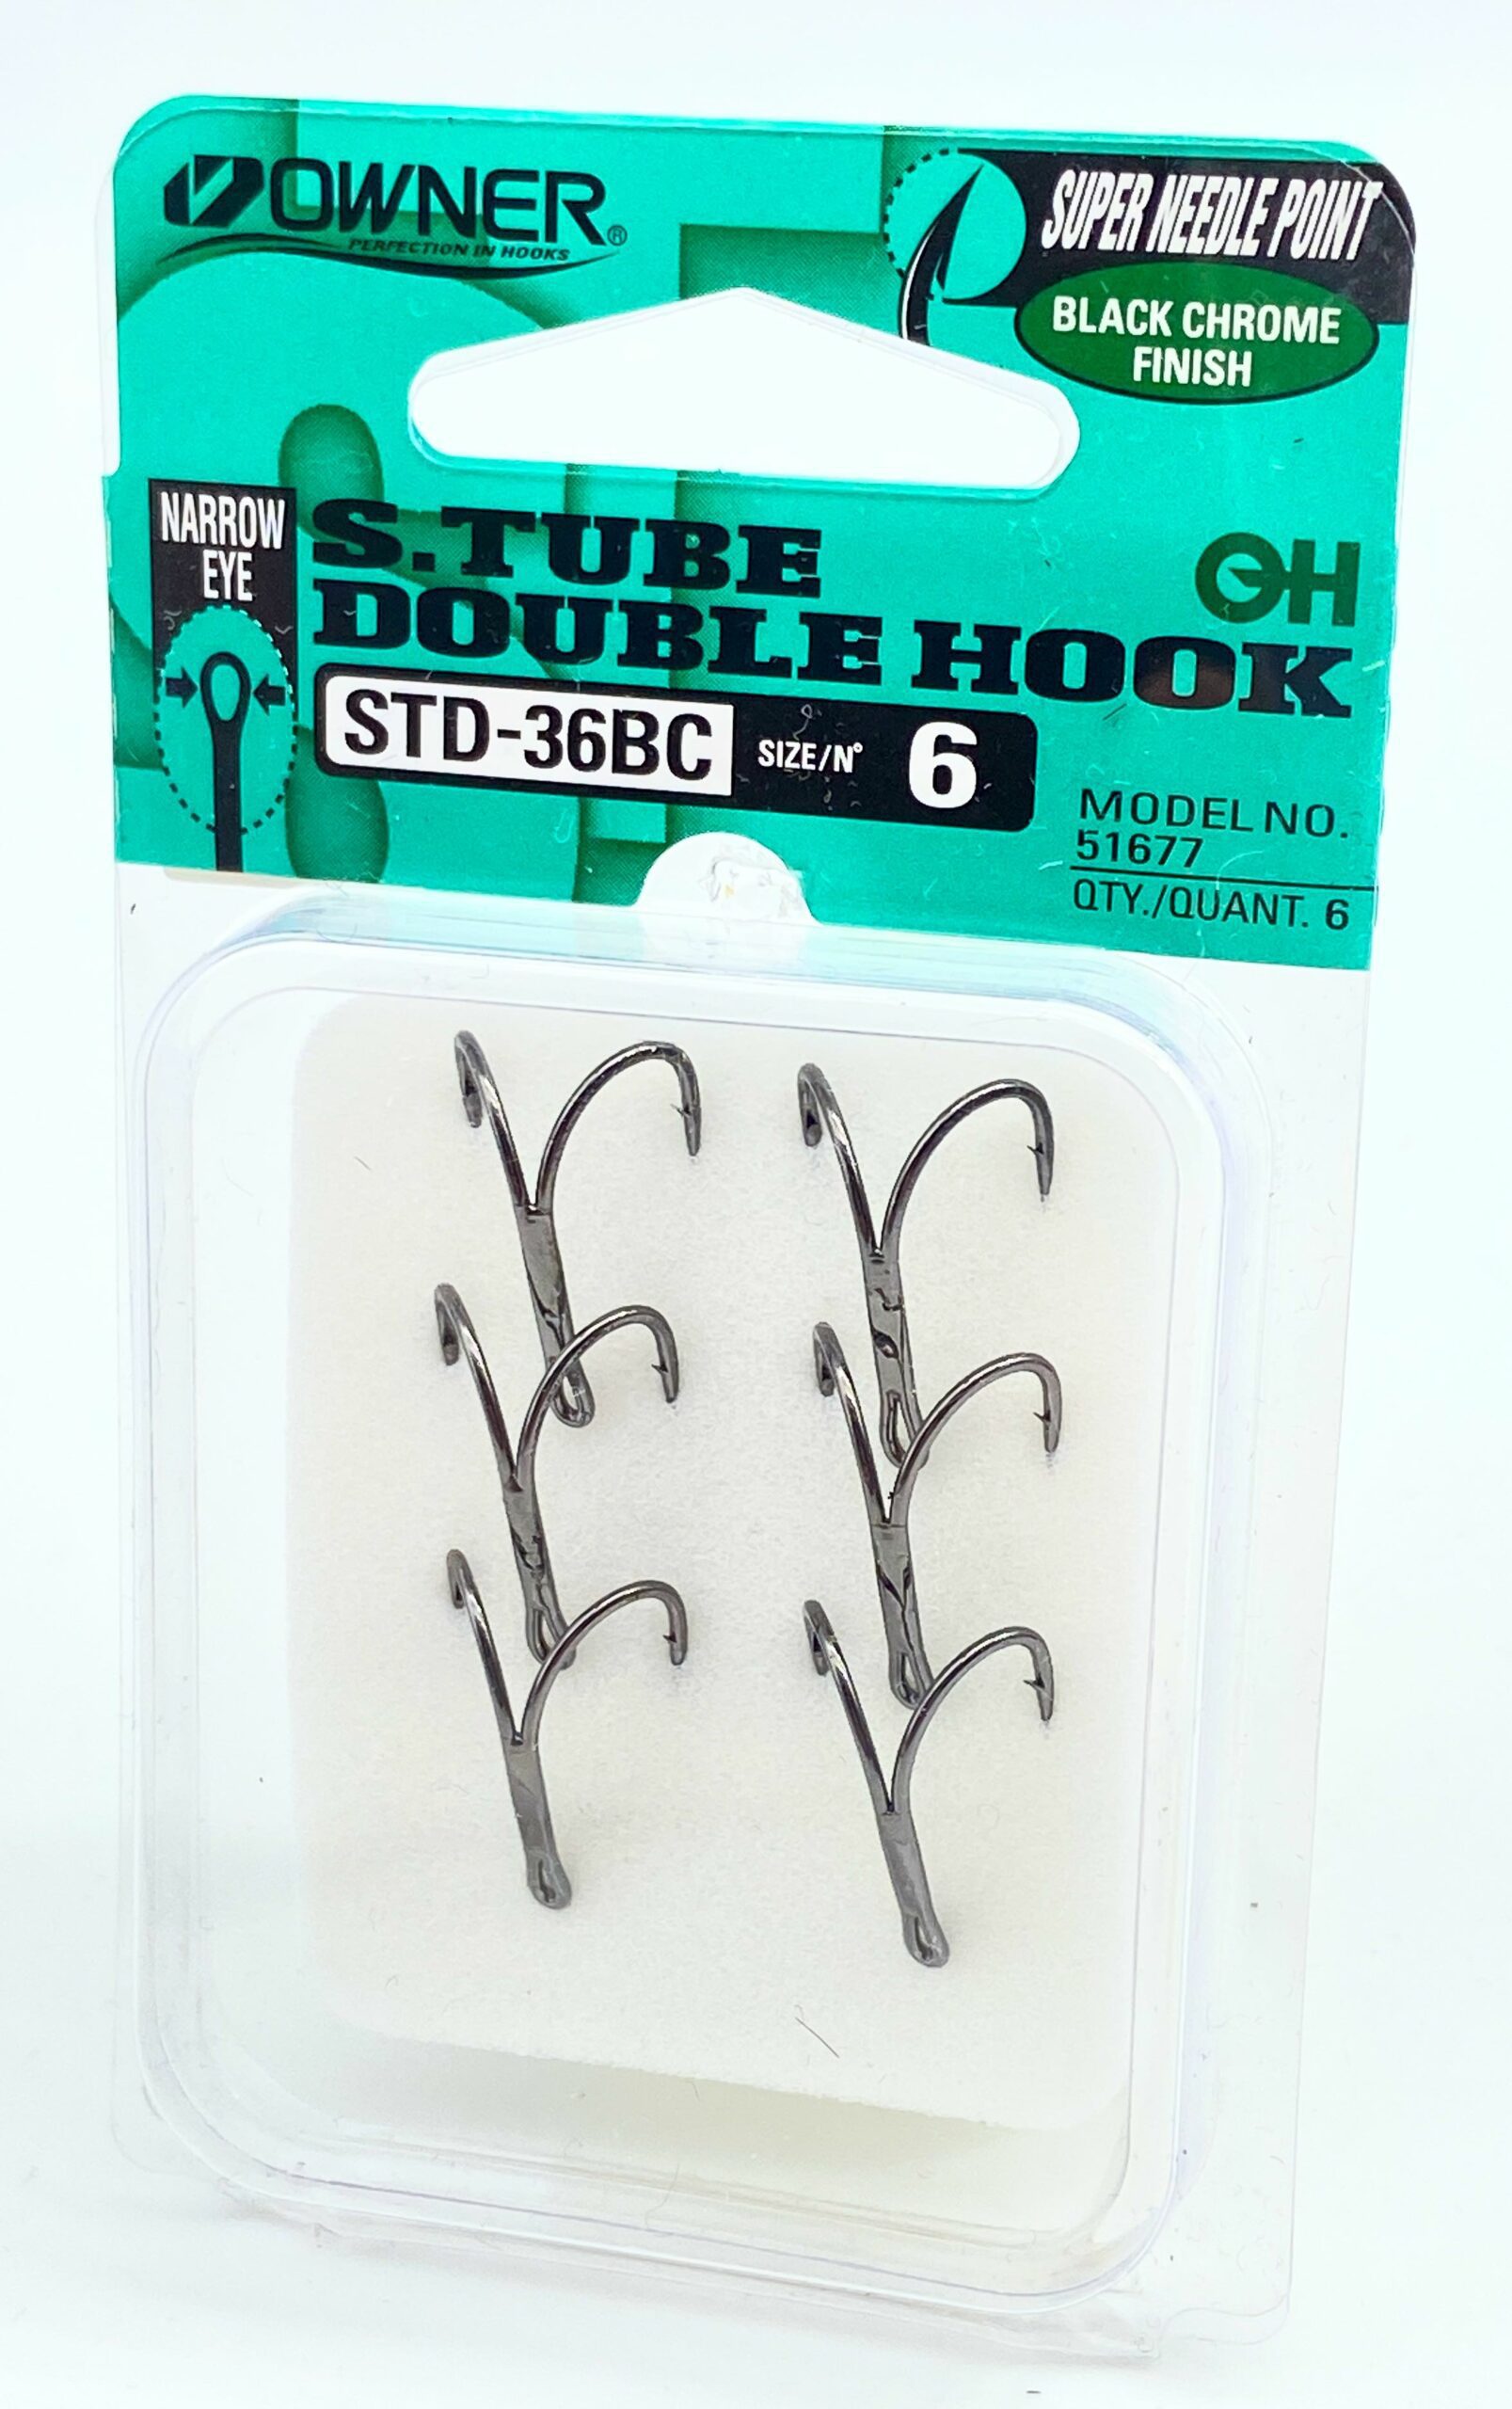 6109 Owner SD-36 Double Hook Stinger Size 10 